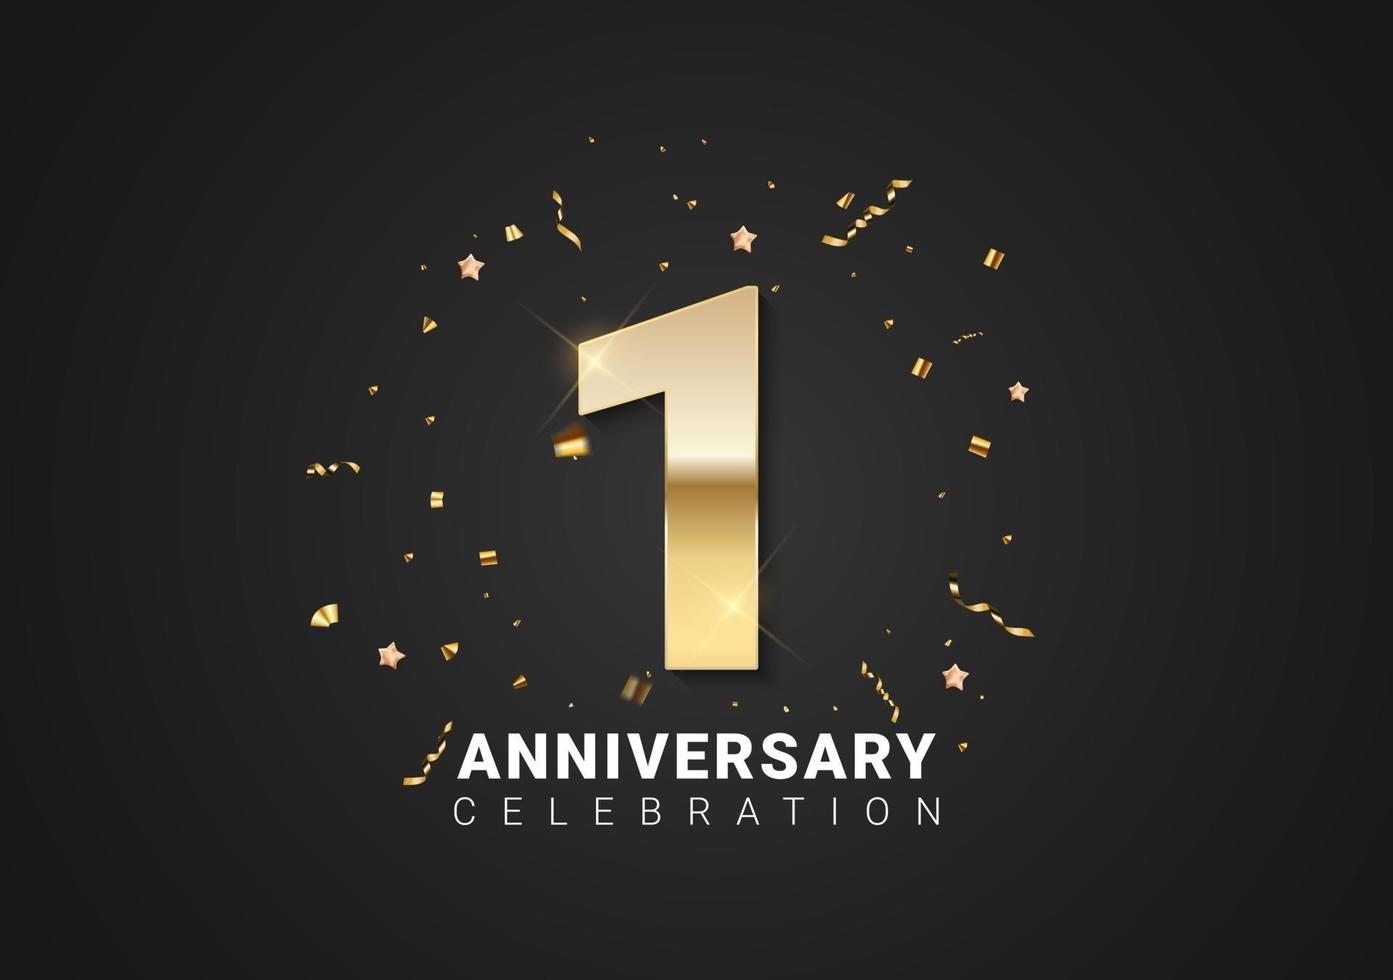 1 anniversary background with golden numbers, confetti, stars vector